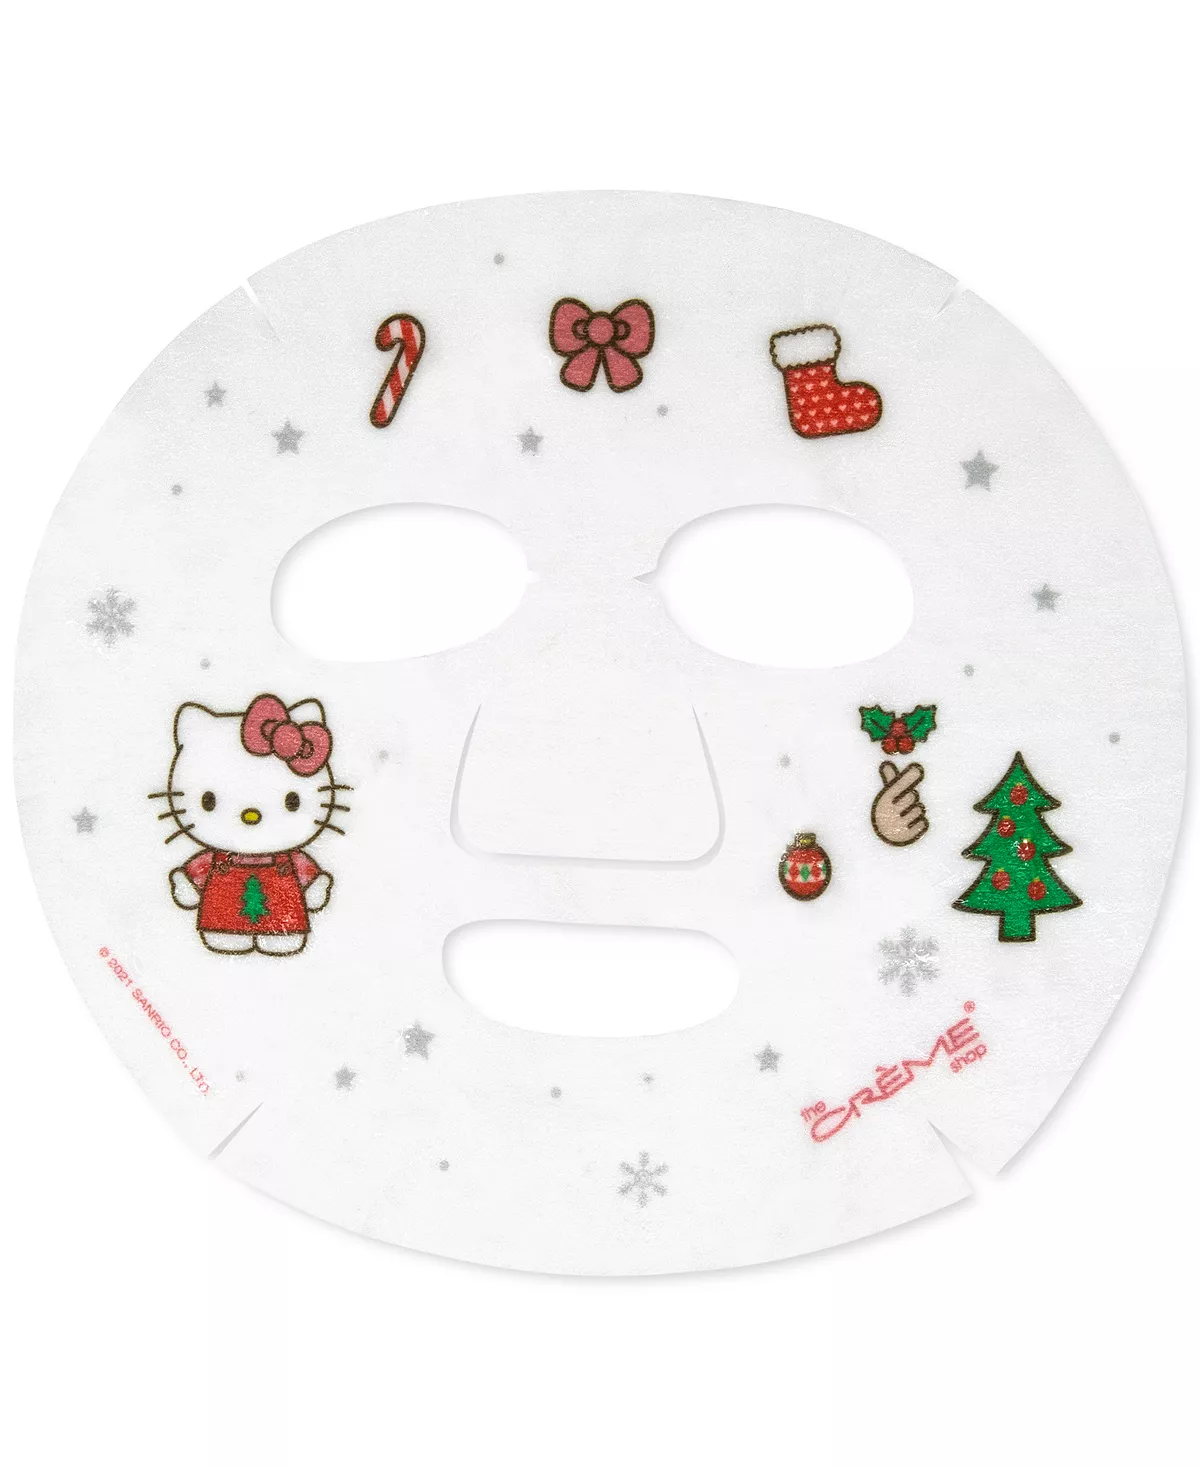 THE CREME SHOP x HELLO KITTY Merry & Bright (NEW x 8 Masks) For All Skin Types!